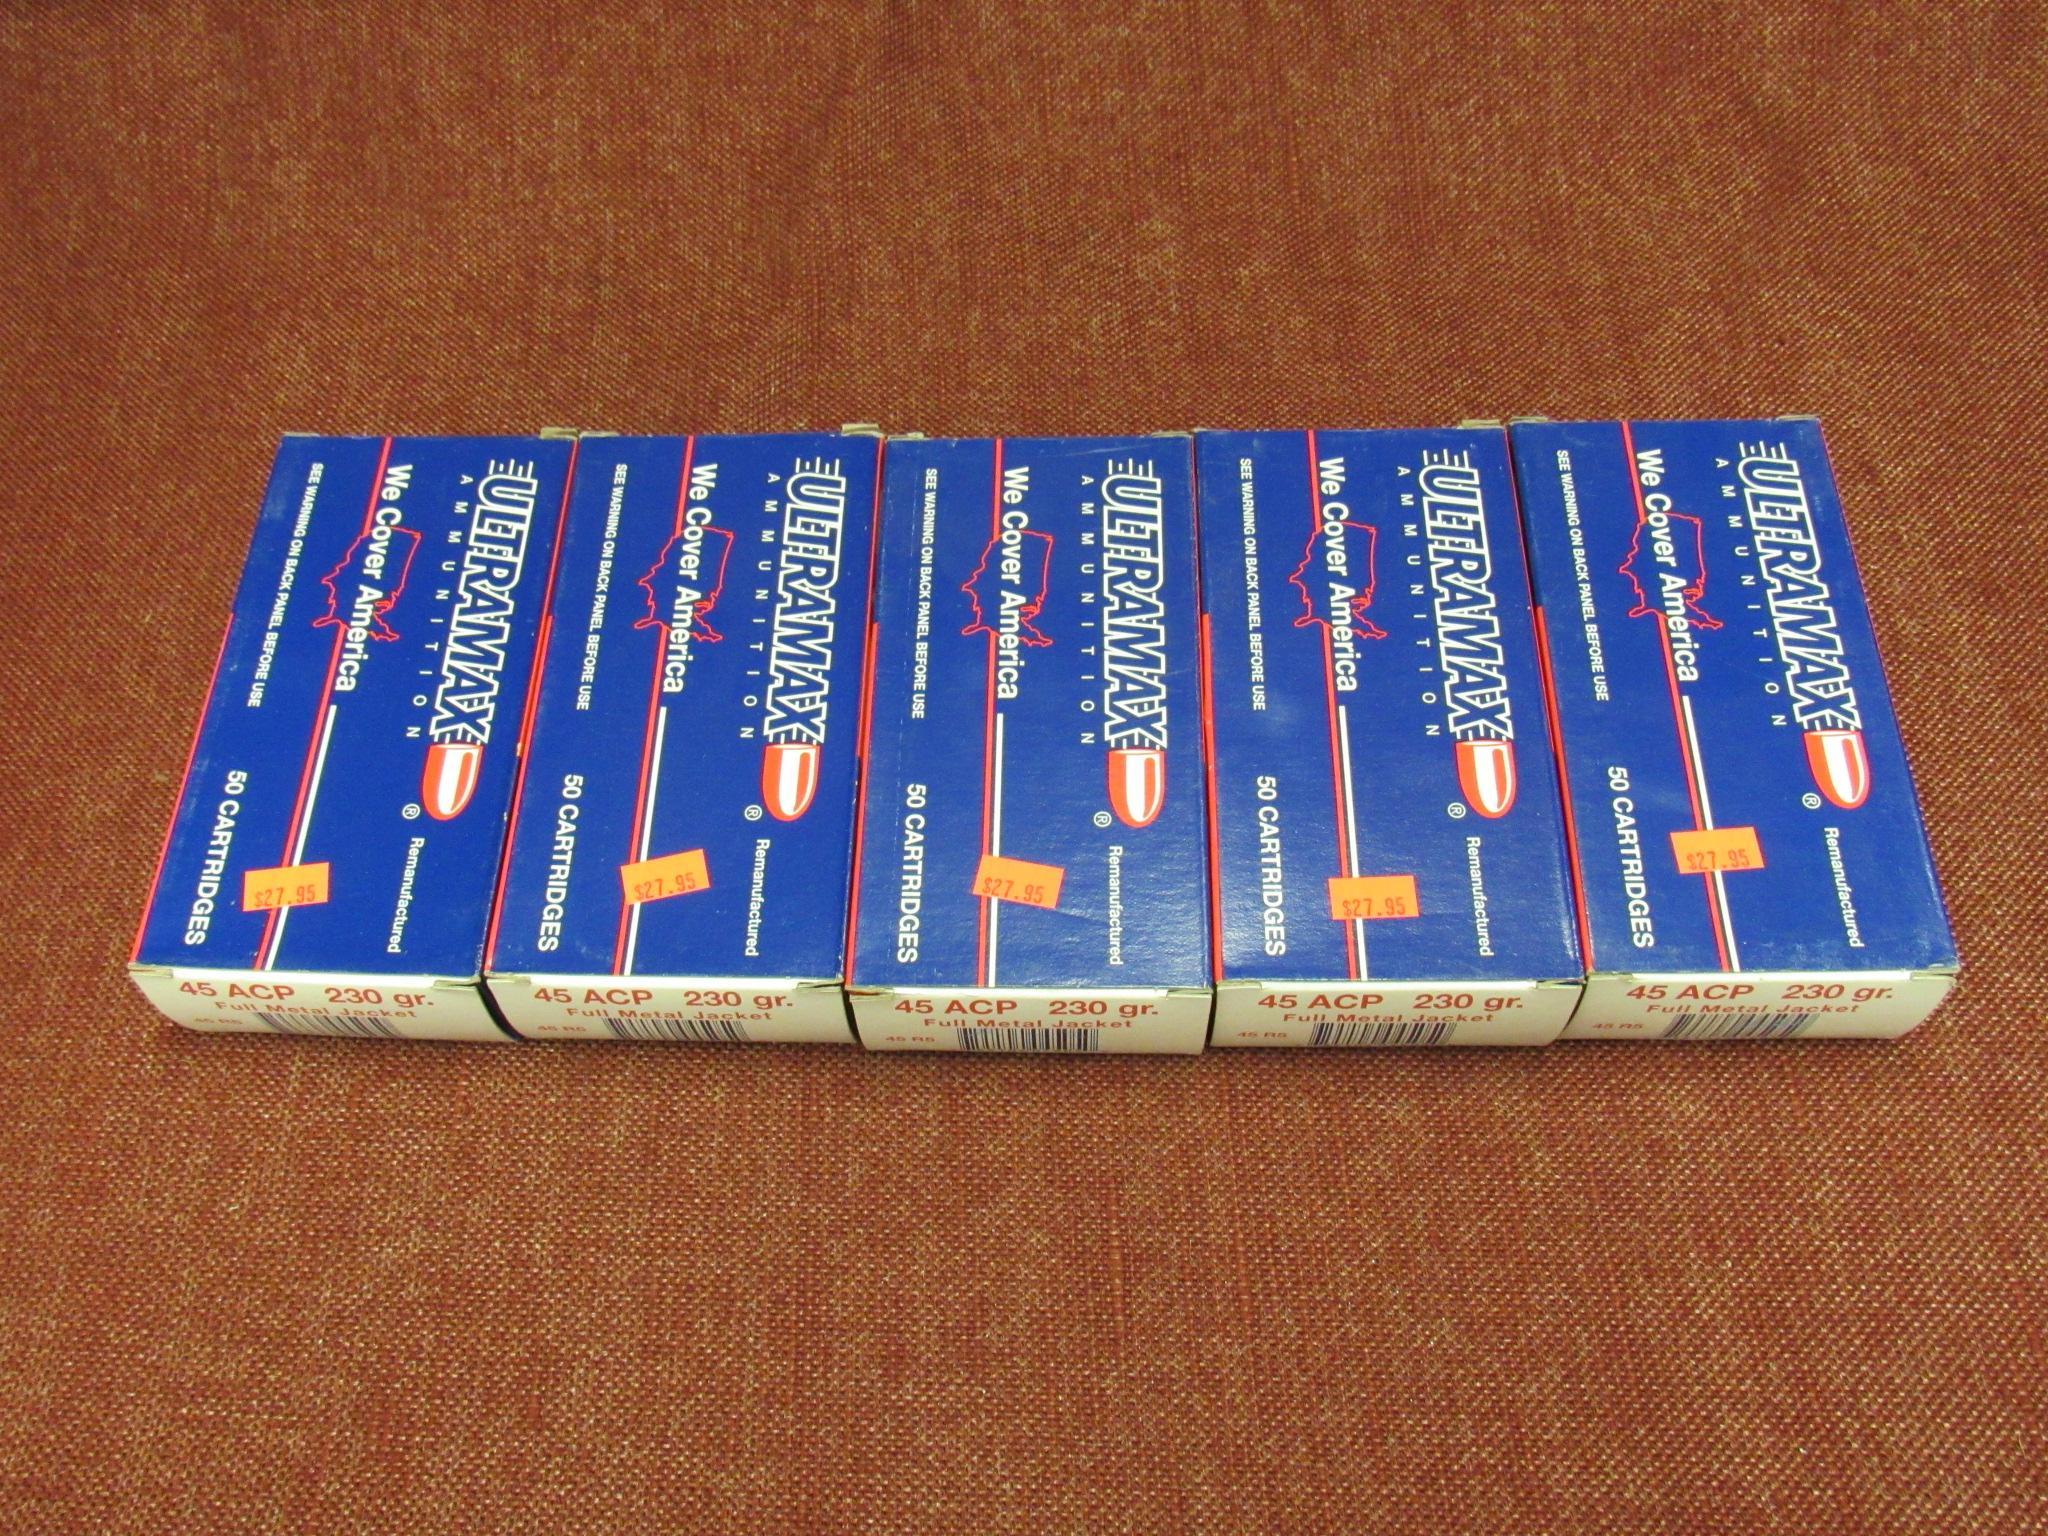 5 boxes of 45 acp 230 gr ammo